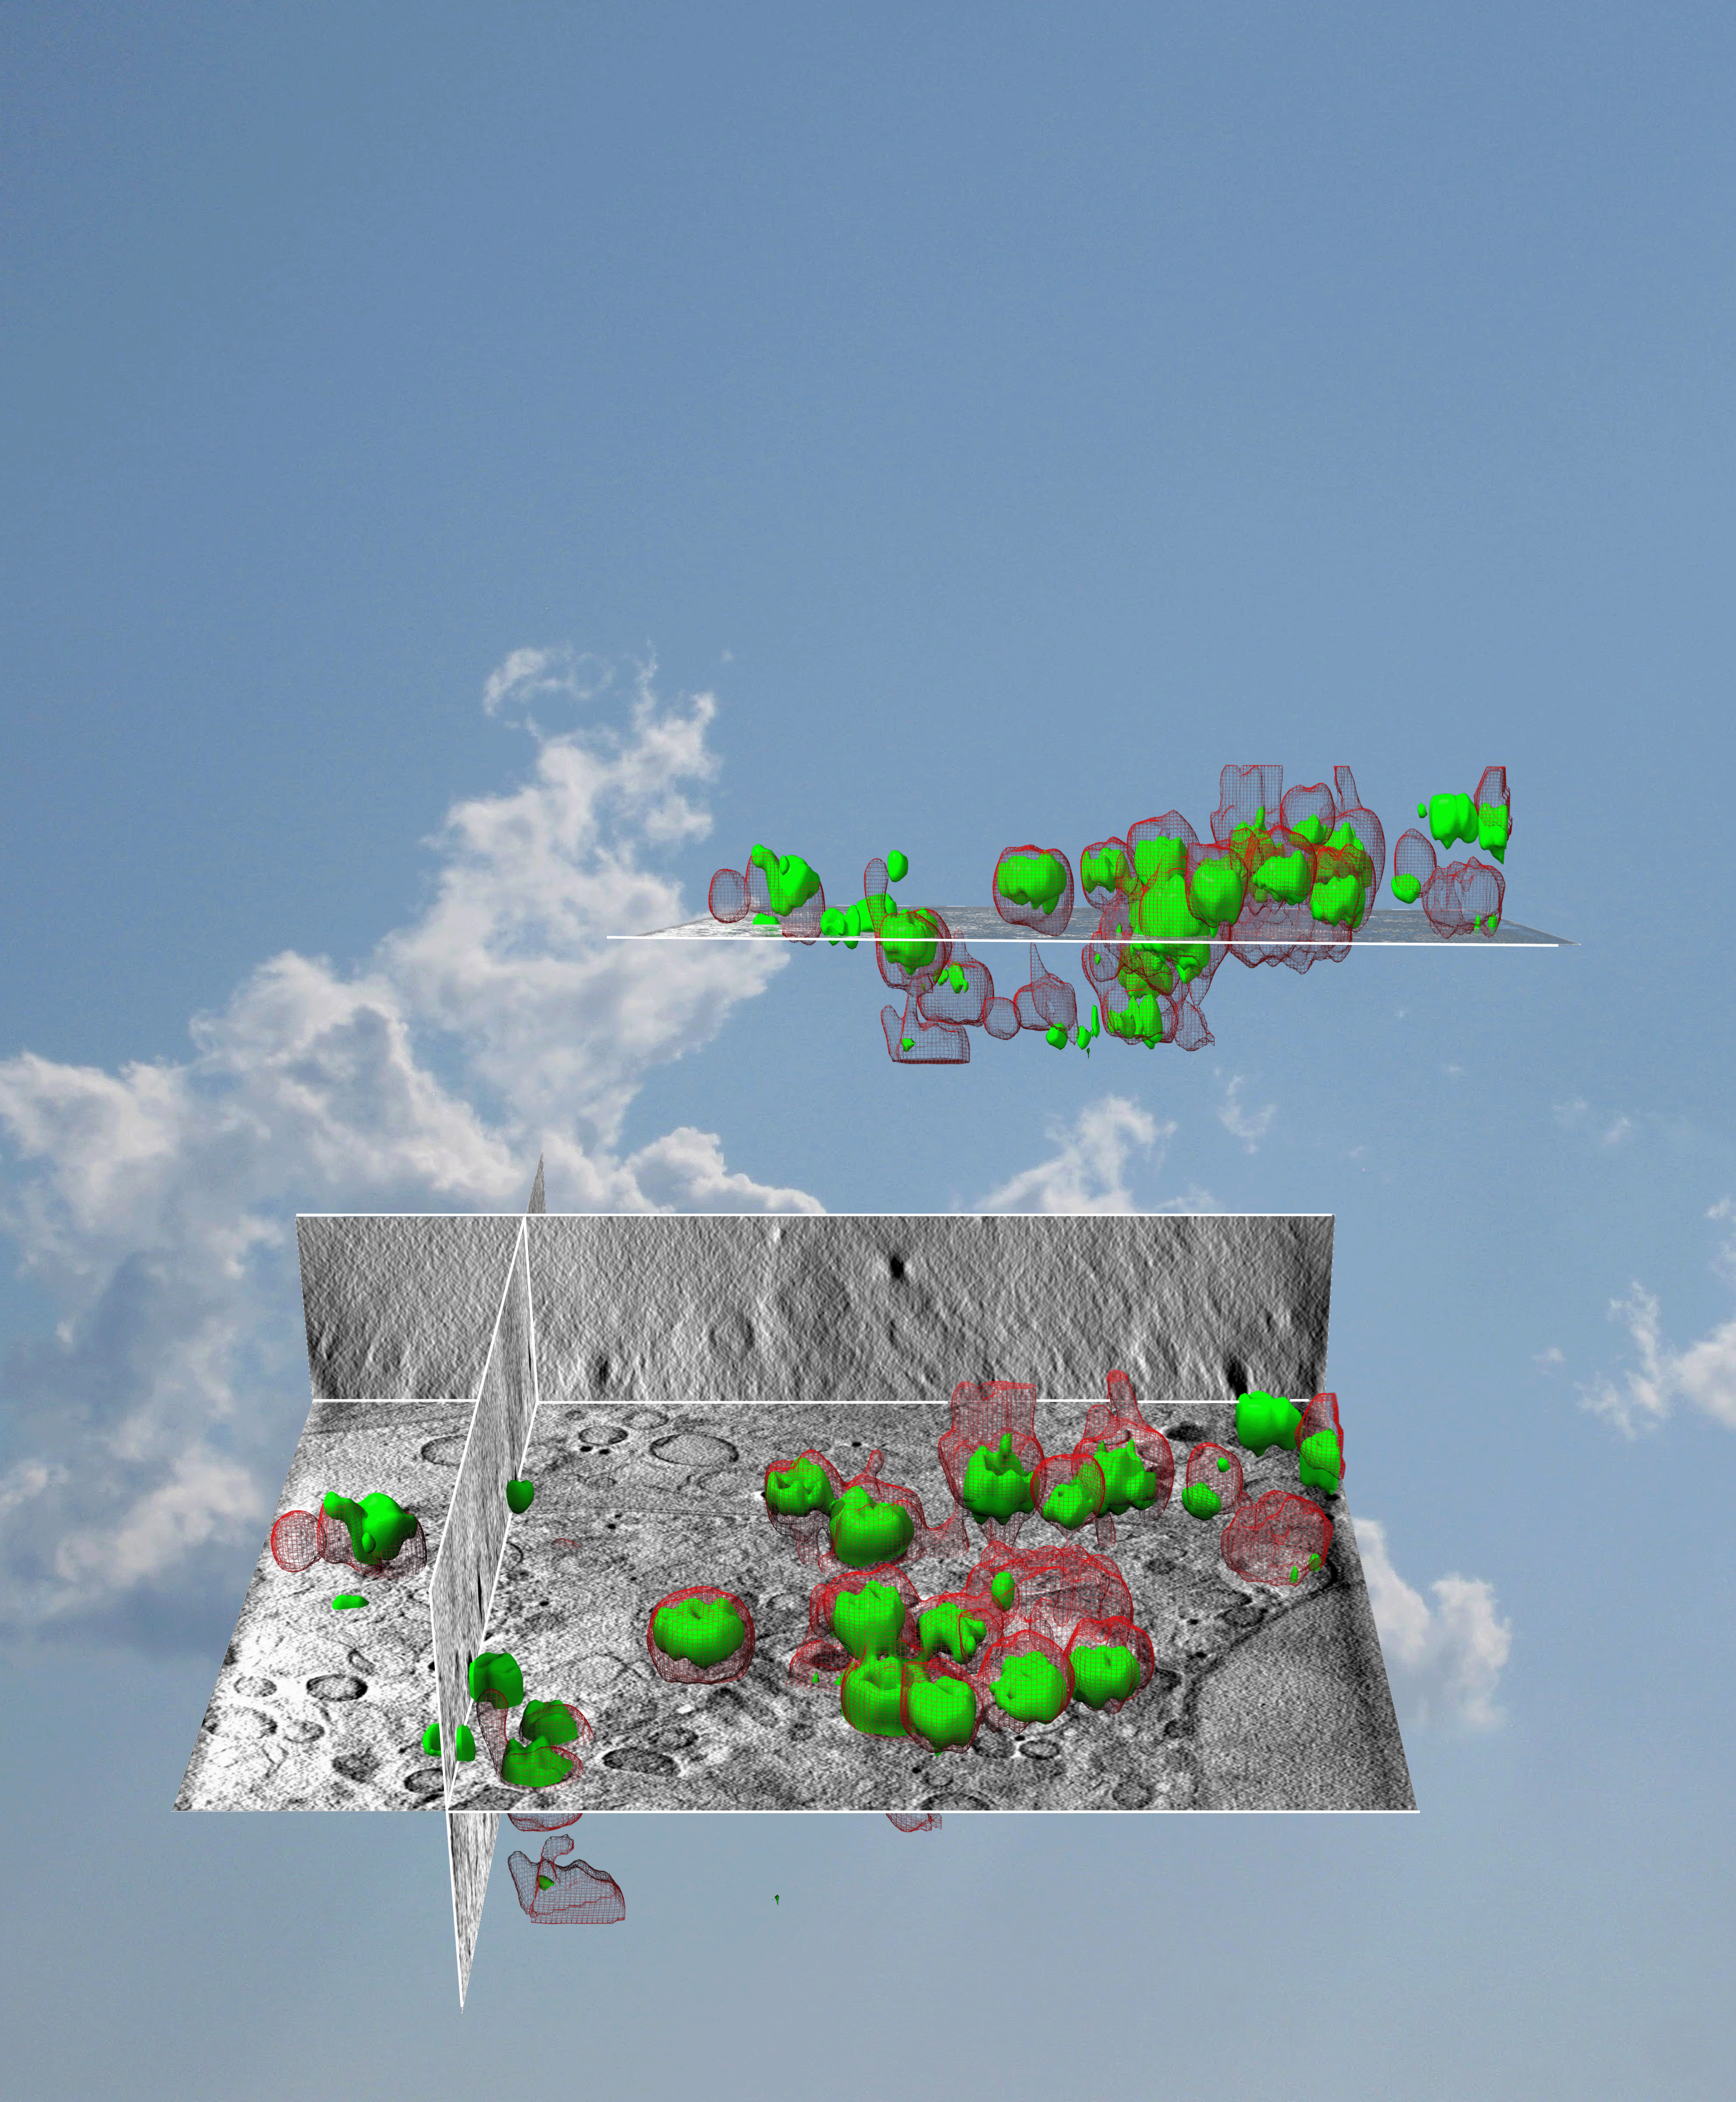 3D rendering of the cryoSIM recorded structures displaying viral green fluorescence within the cytoplasm and 3D semi-transparent rendering of all cytoplasmic vesicles that contain viruses. <br/><br/>The X-ray tomogram of the cell that contains these structures is represented by the grayscale slices of its planes with the associated cellular structures clearly delineated. 